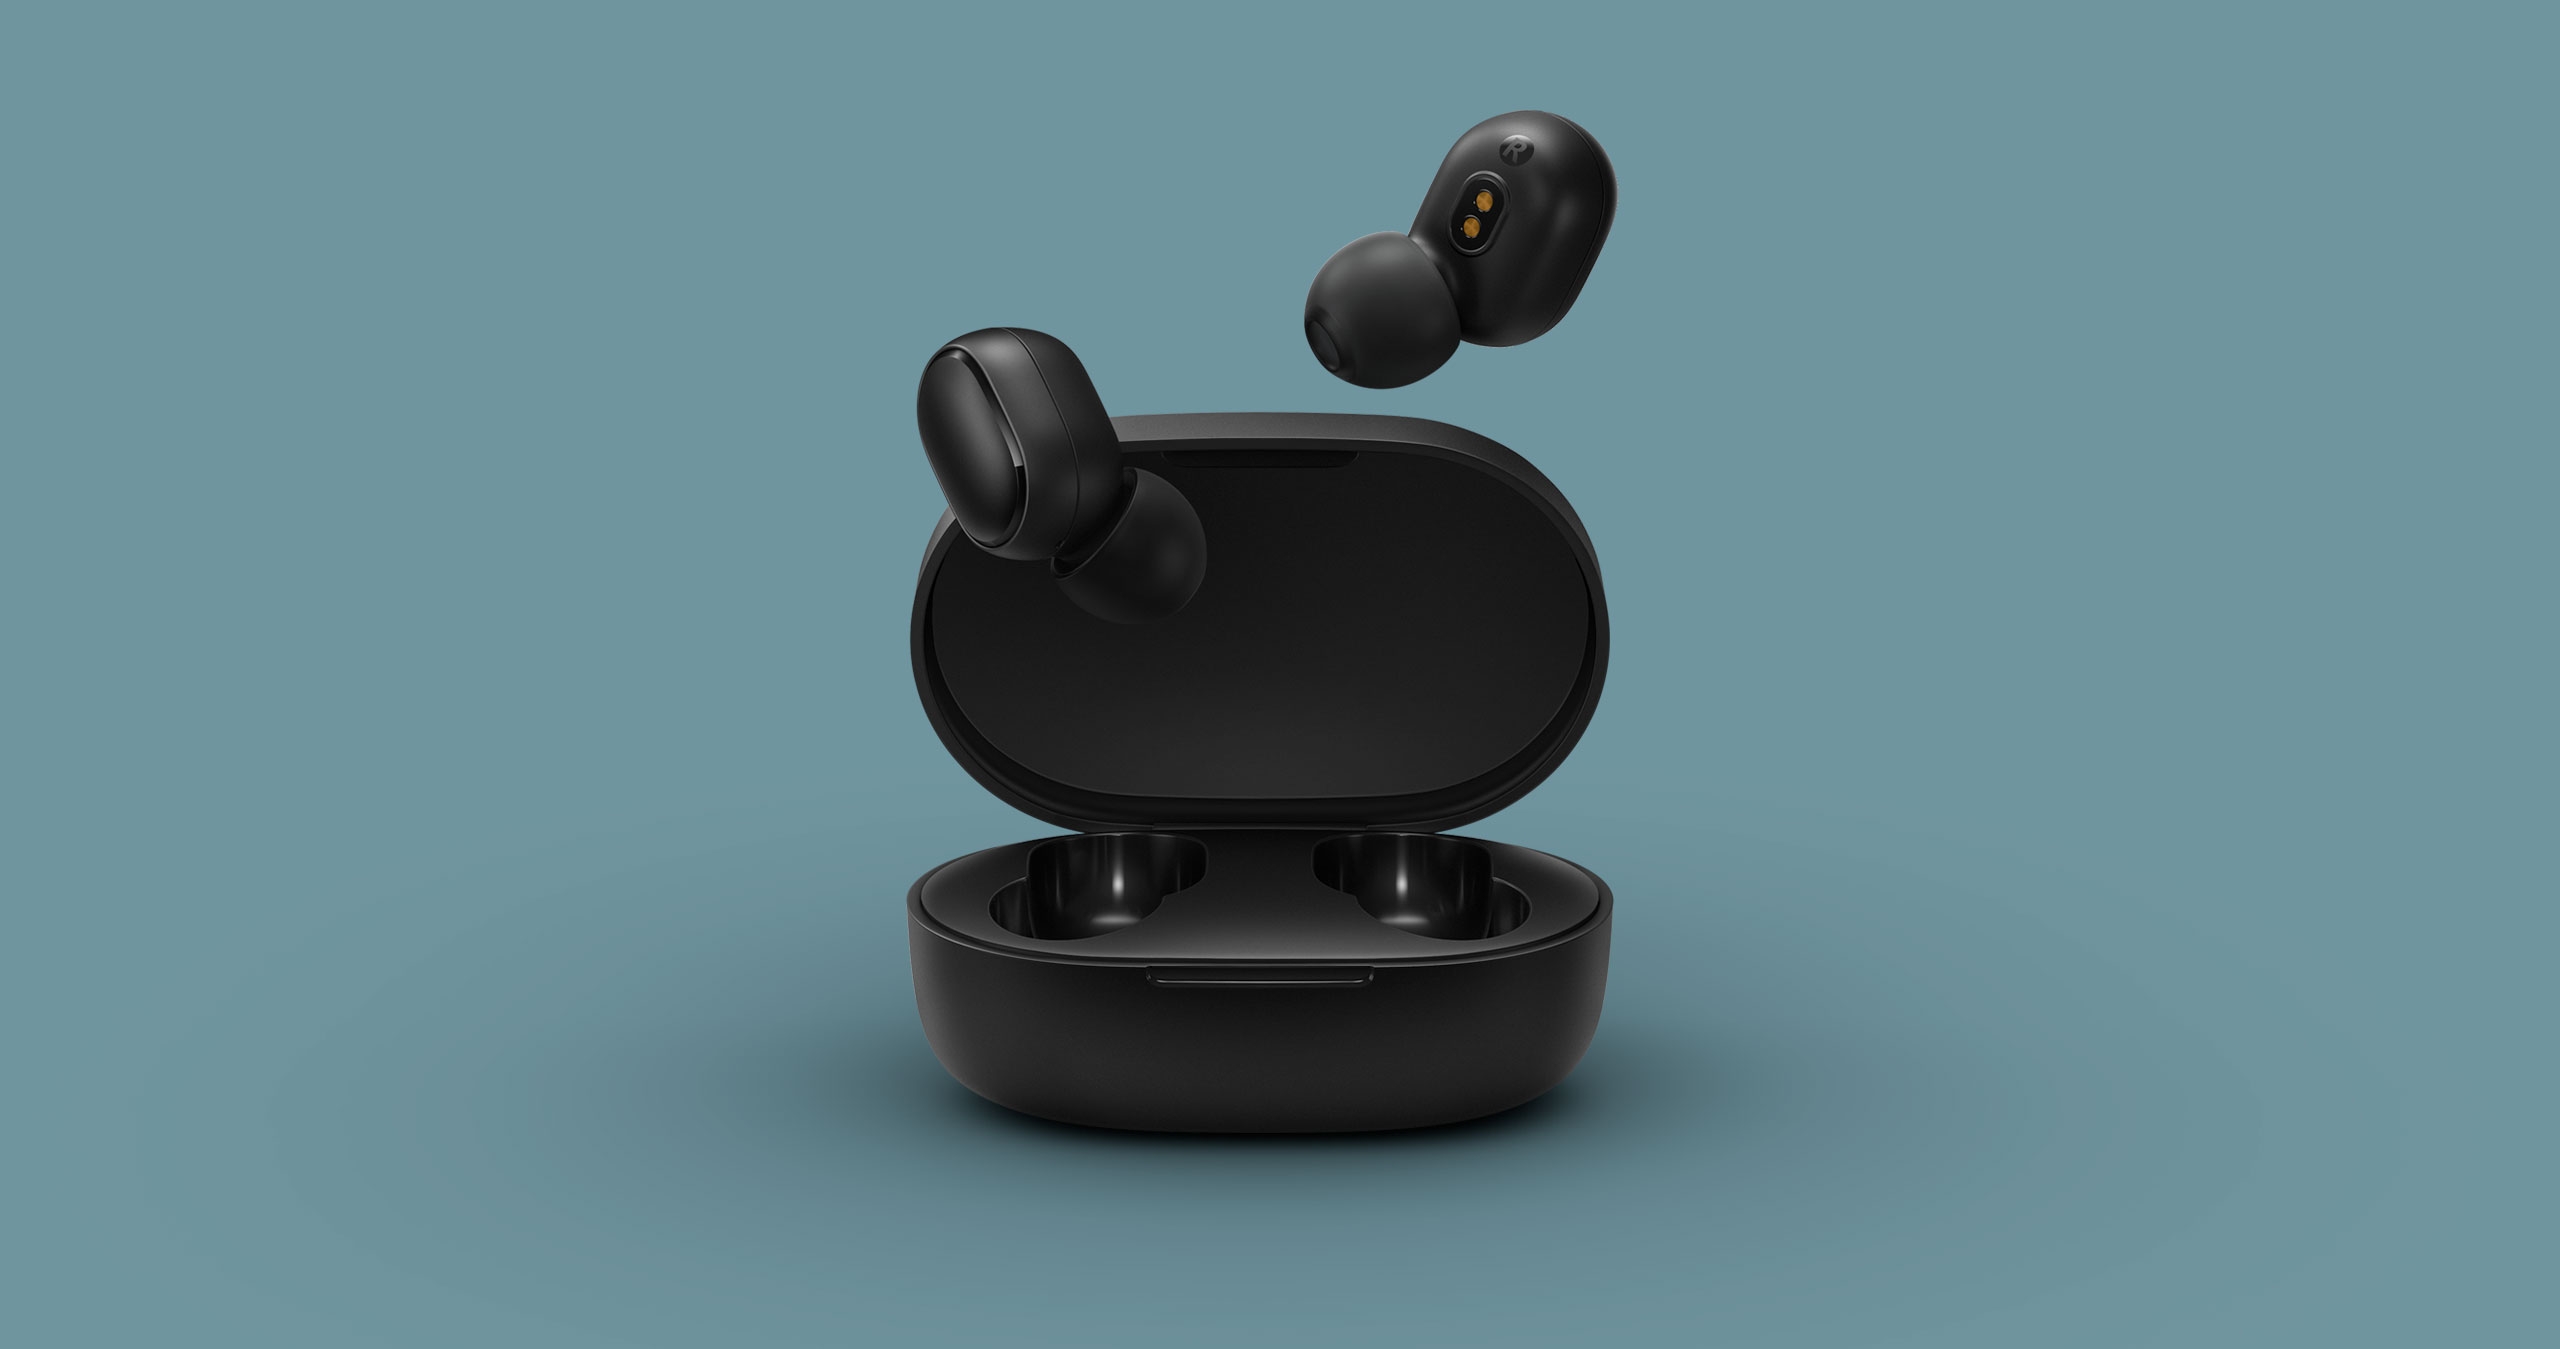 Xiaomi launches 3 wireless earbuds including an AirPods